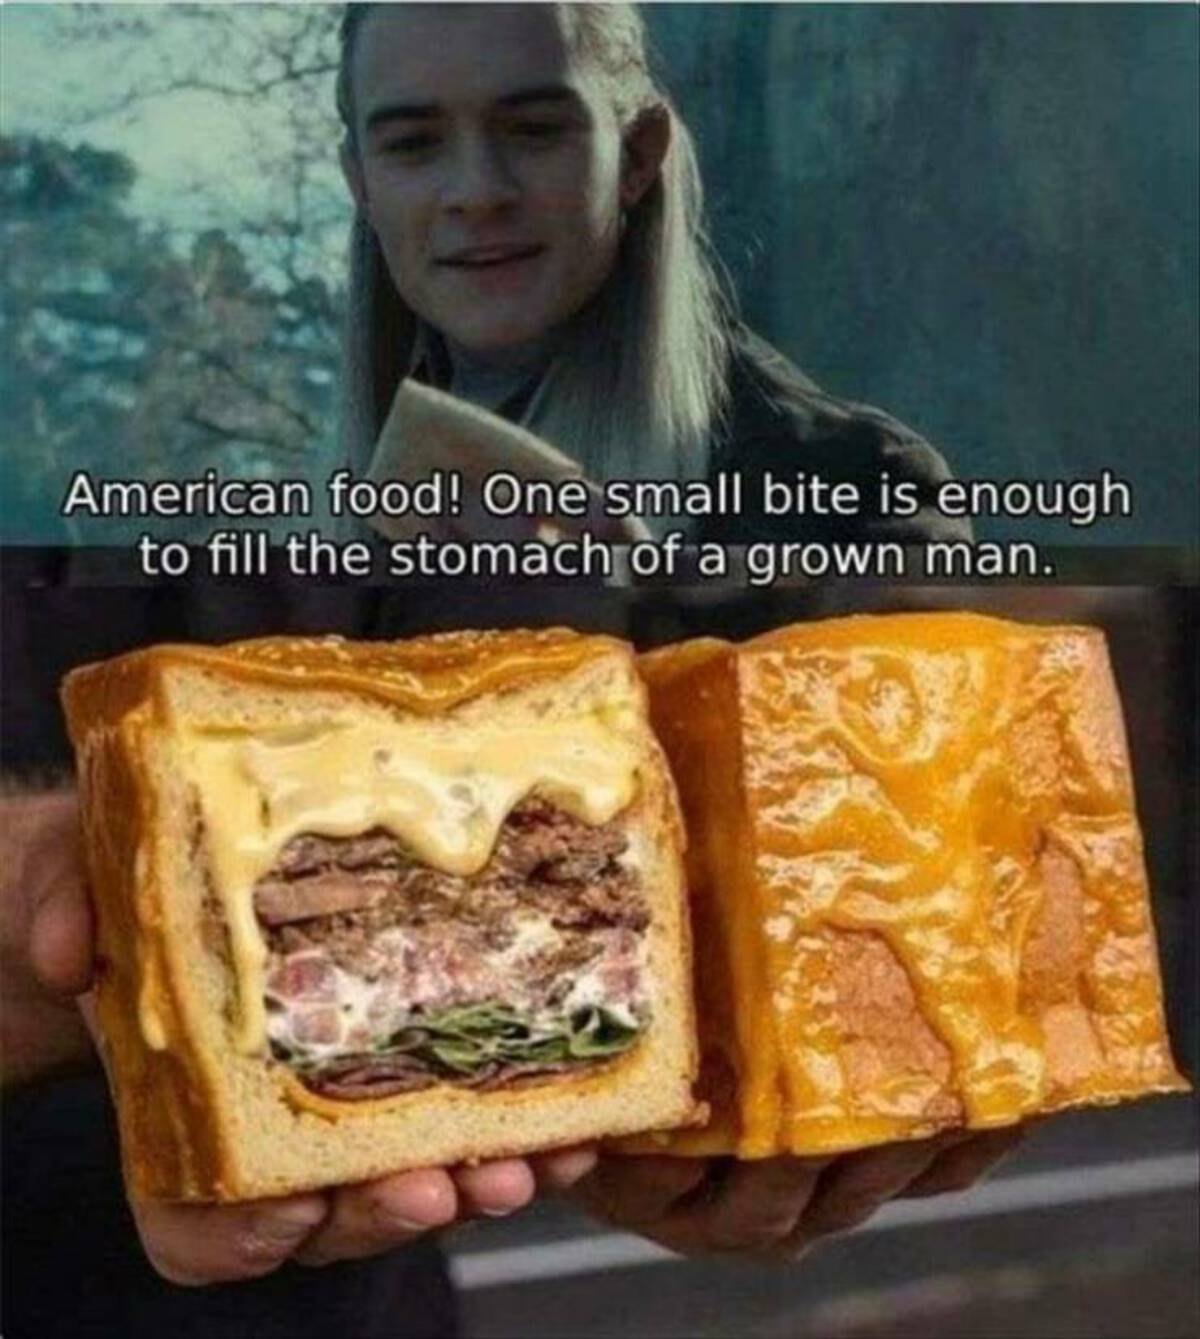 legolas american food - American food! One small bite is enough to fill the stomach of a grown man.